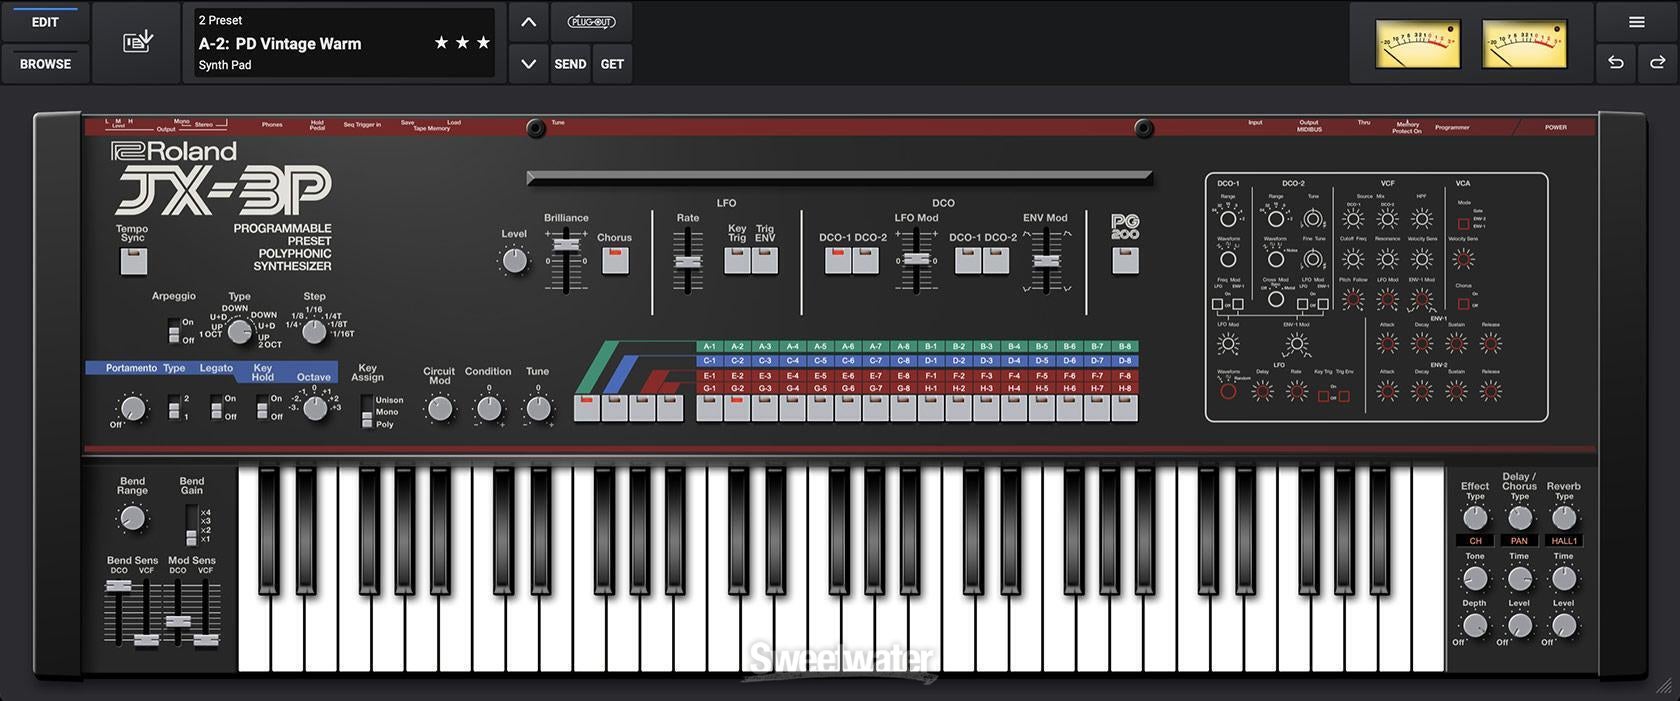 Roland JX-3P Synthesizer Software